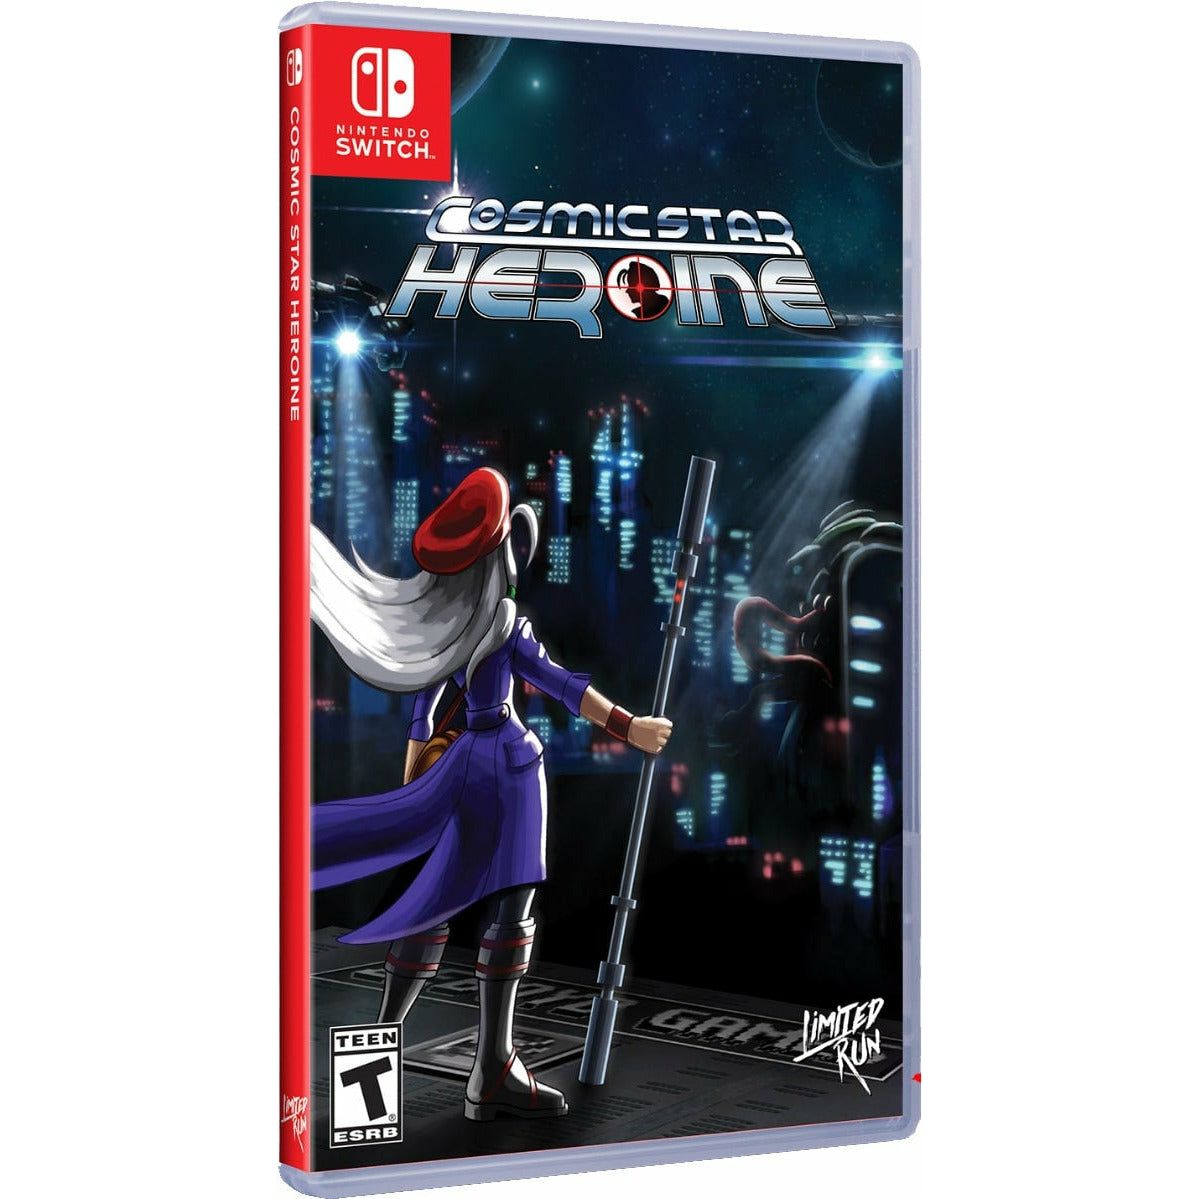 Switch - Cosmic Star Heroine (Limited Run Game #020) (In Case)